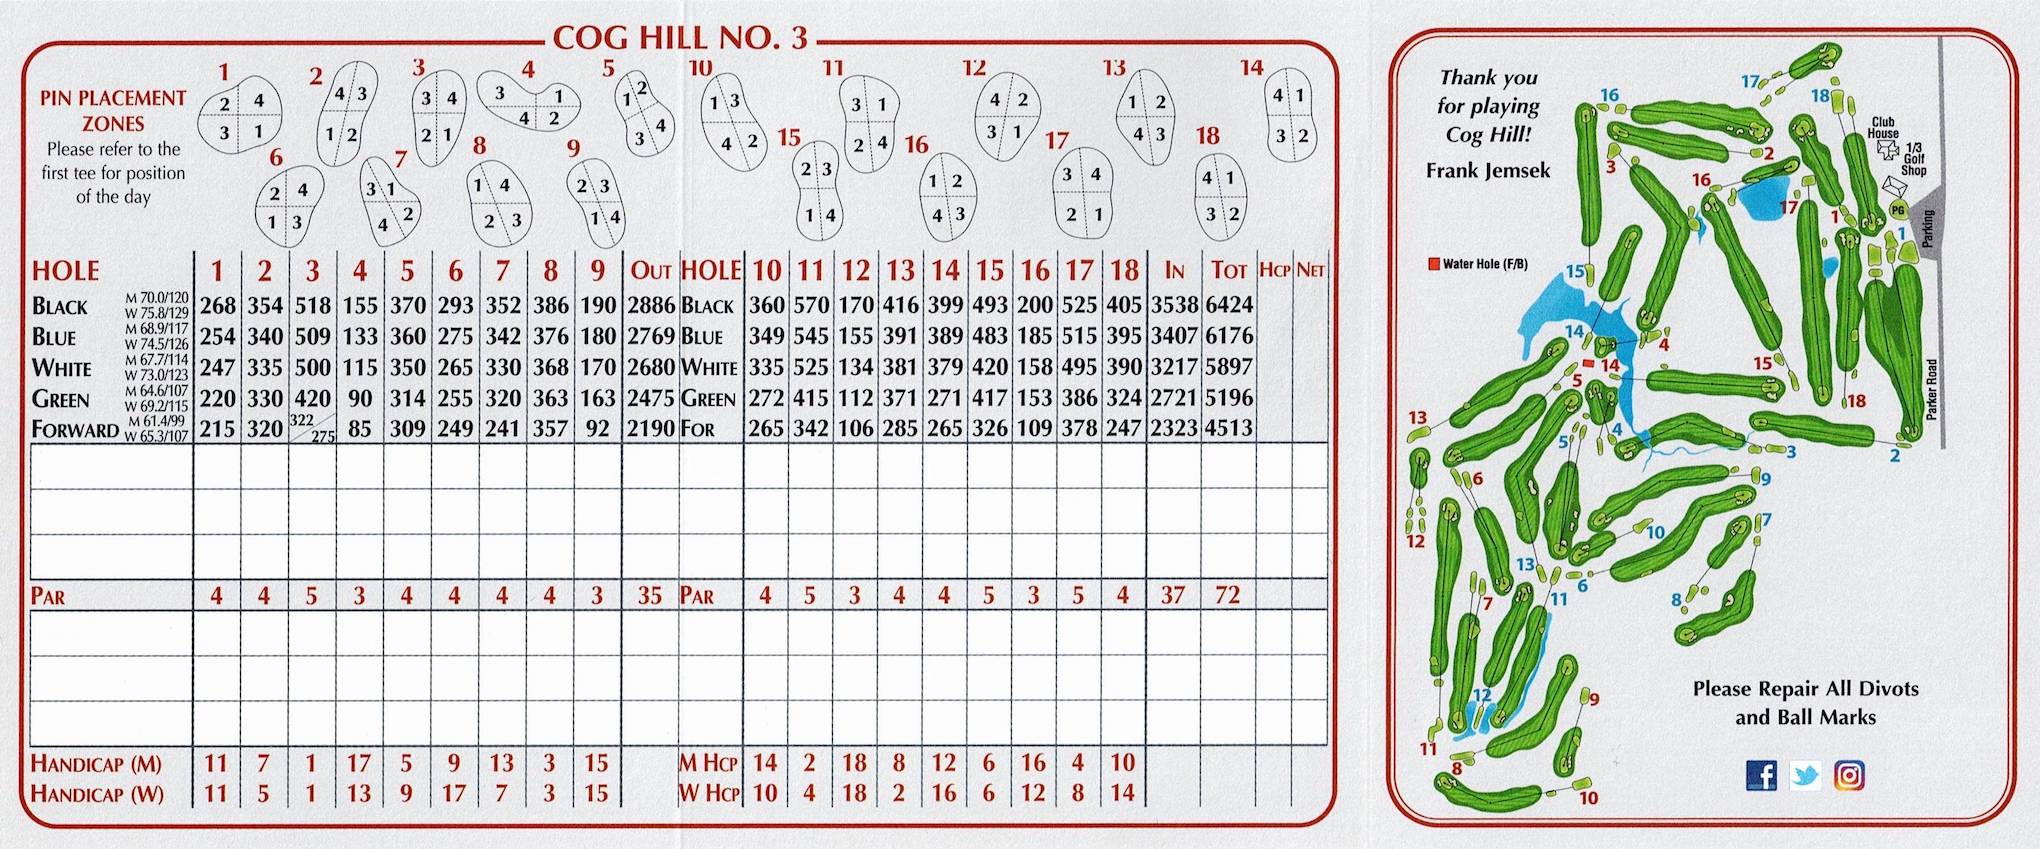 Scan of the scorecard from Cog Hill Course #3 in Lemont, Illinois. The scorecard has the pin placement zones for each green. The day's zone is at the first tee box.